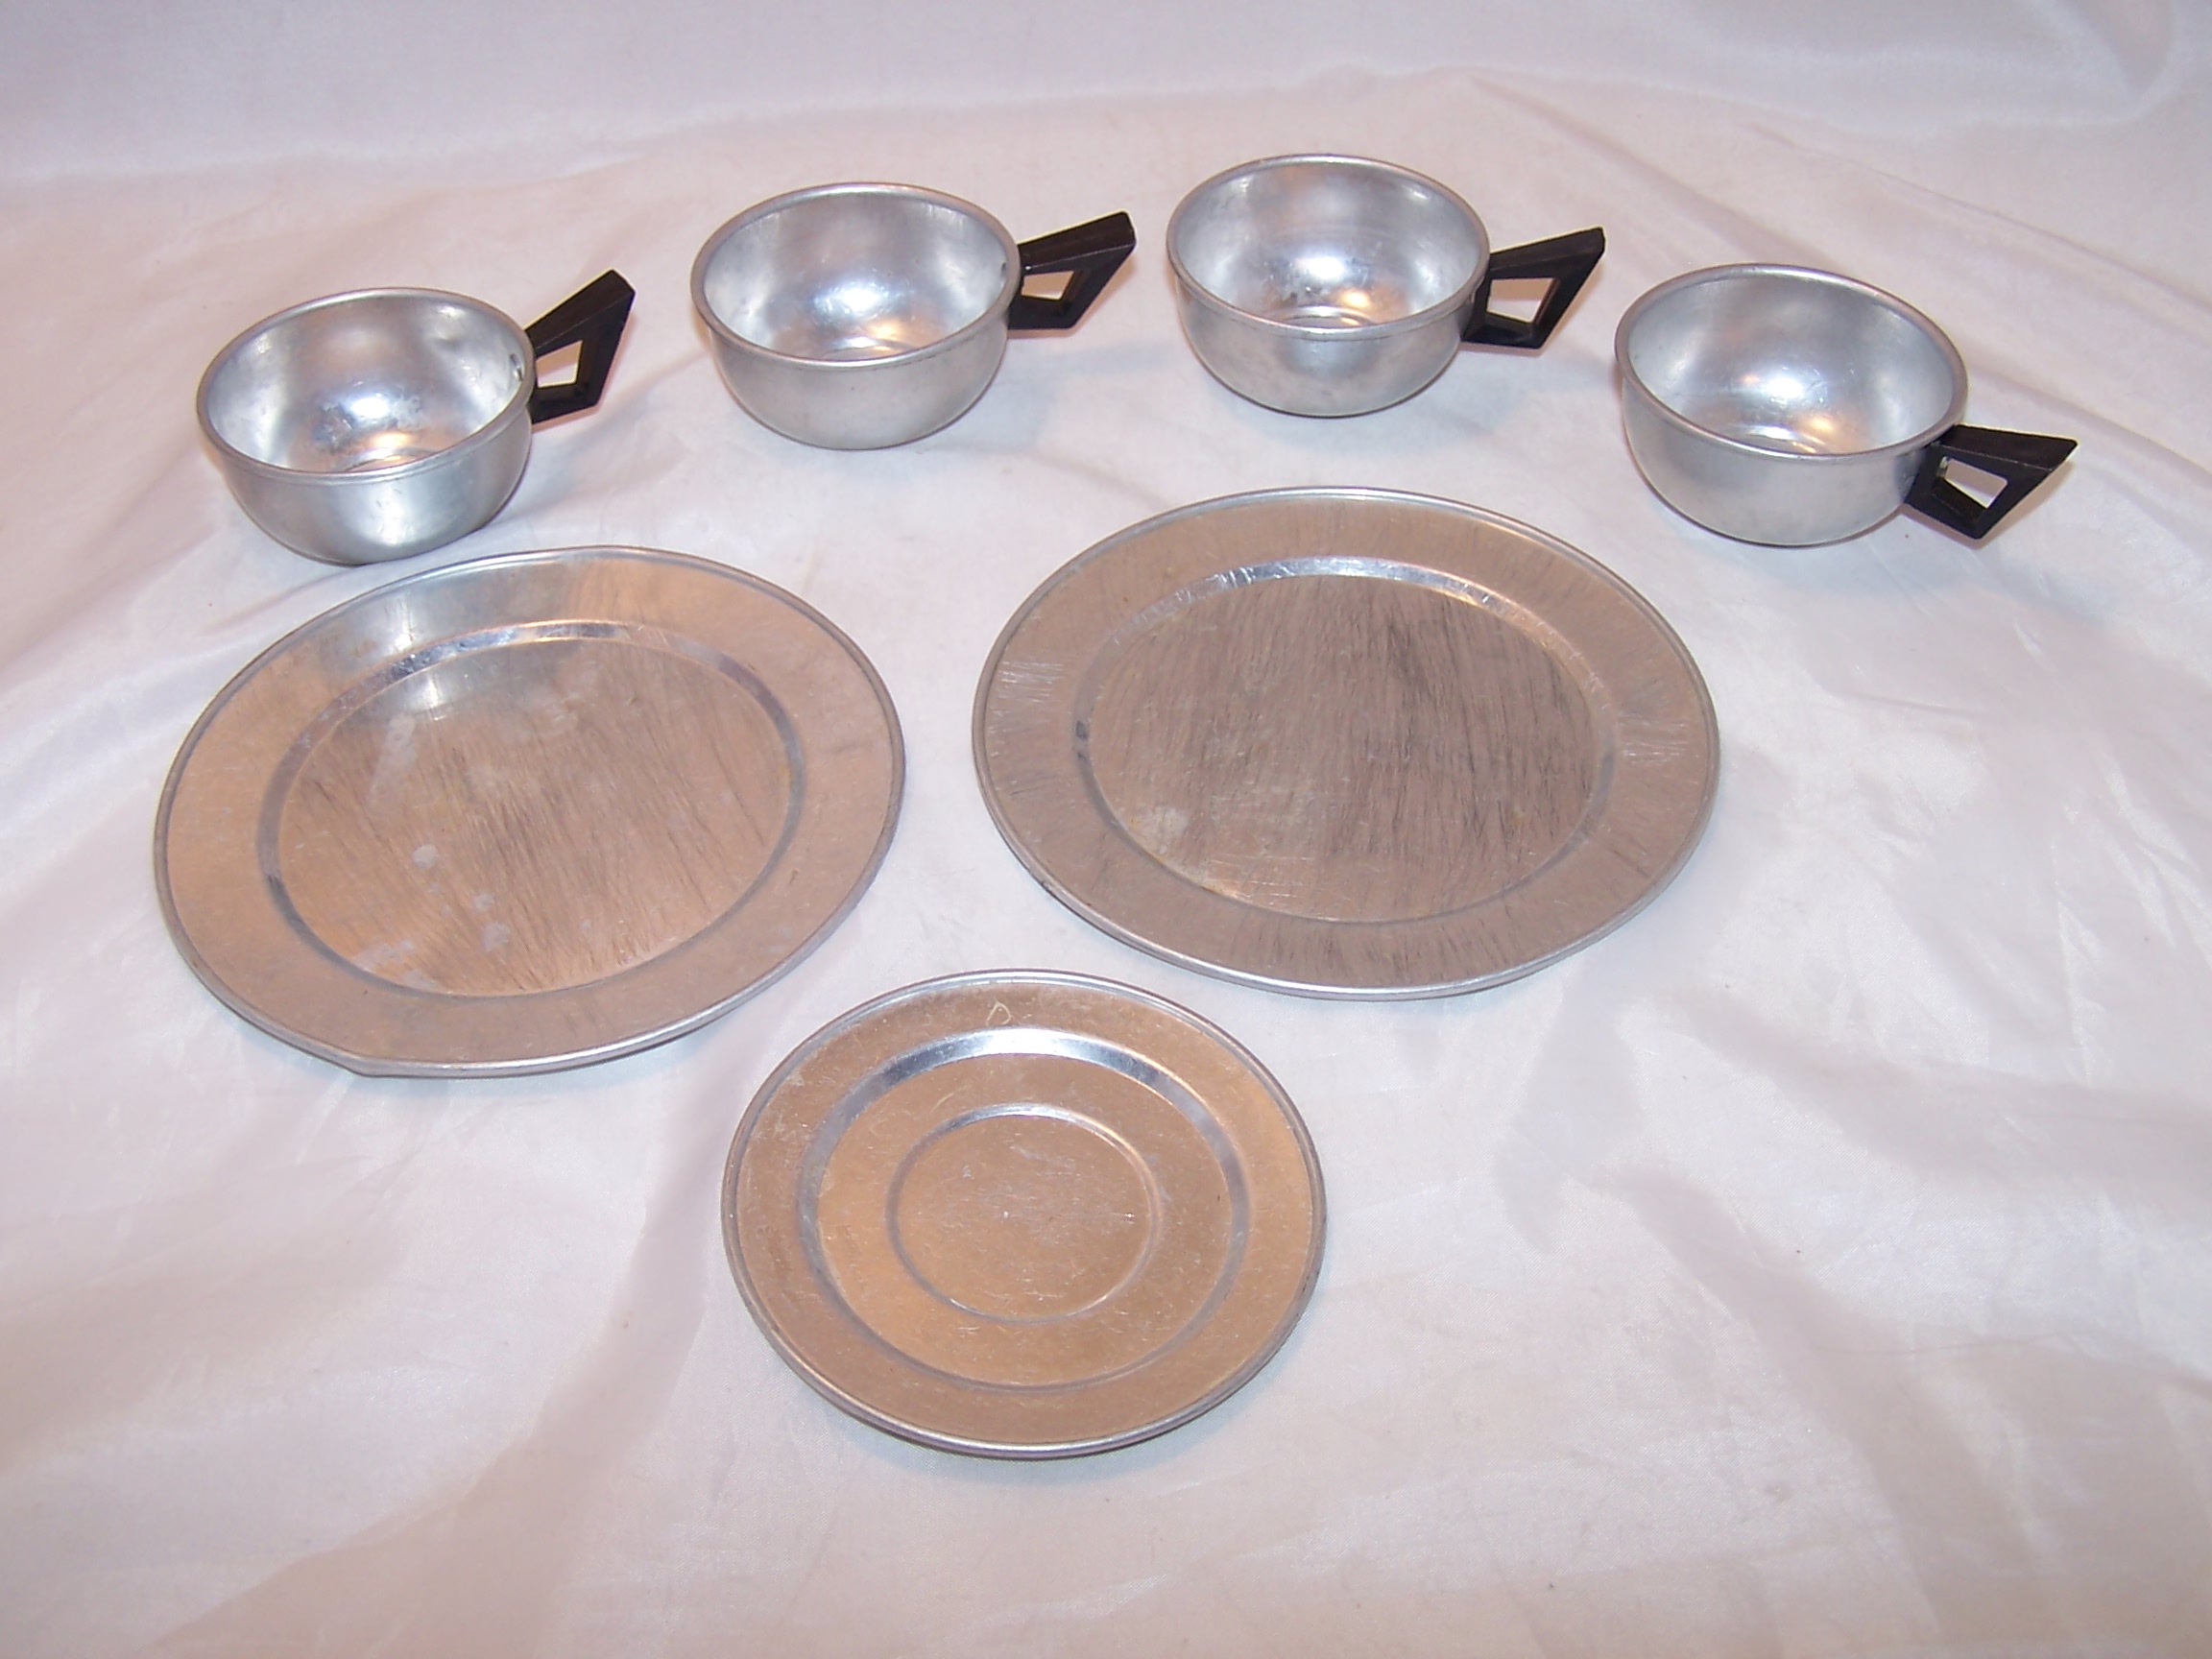 Toy Cups, Saucer, Plates, Aluminum, Vintage Childs Toy